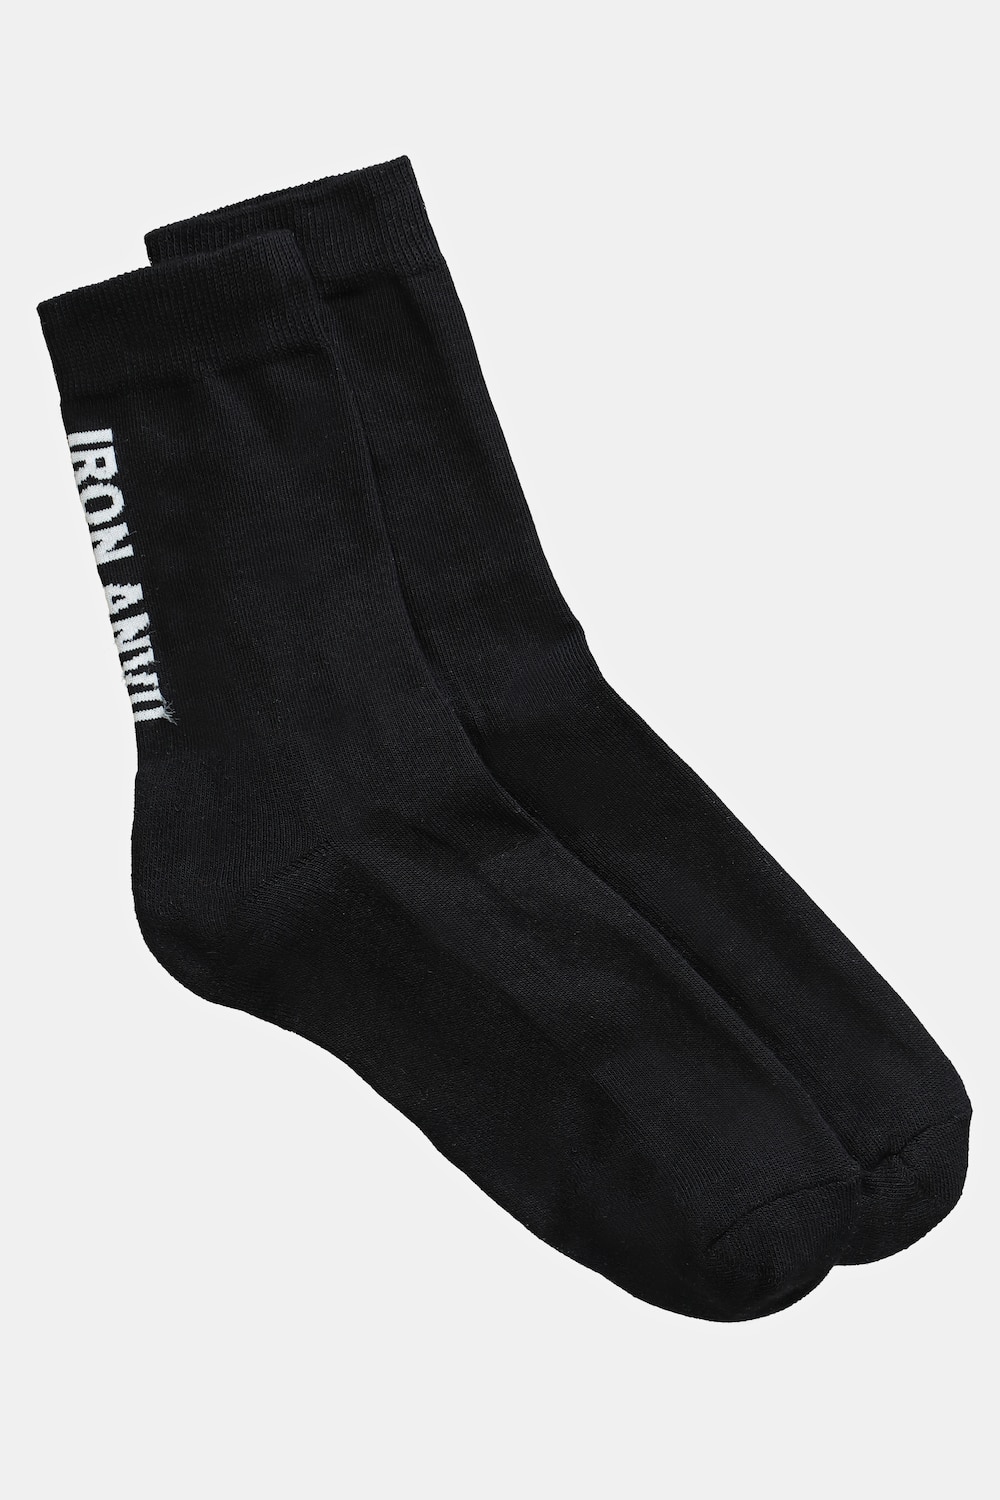 grandes tailles chaussettes se sport jay-pi iron anvil collection fitness, femmes, noir, taille: 47-50, coton, jay-pi